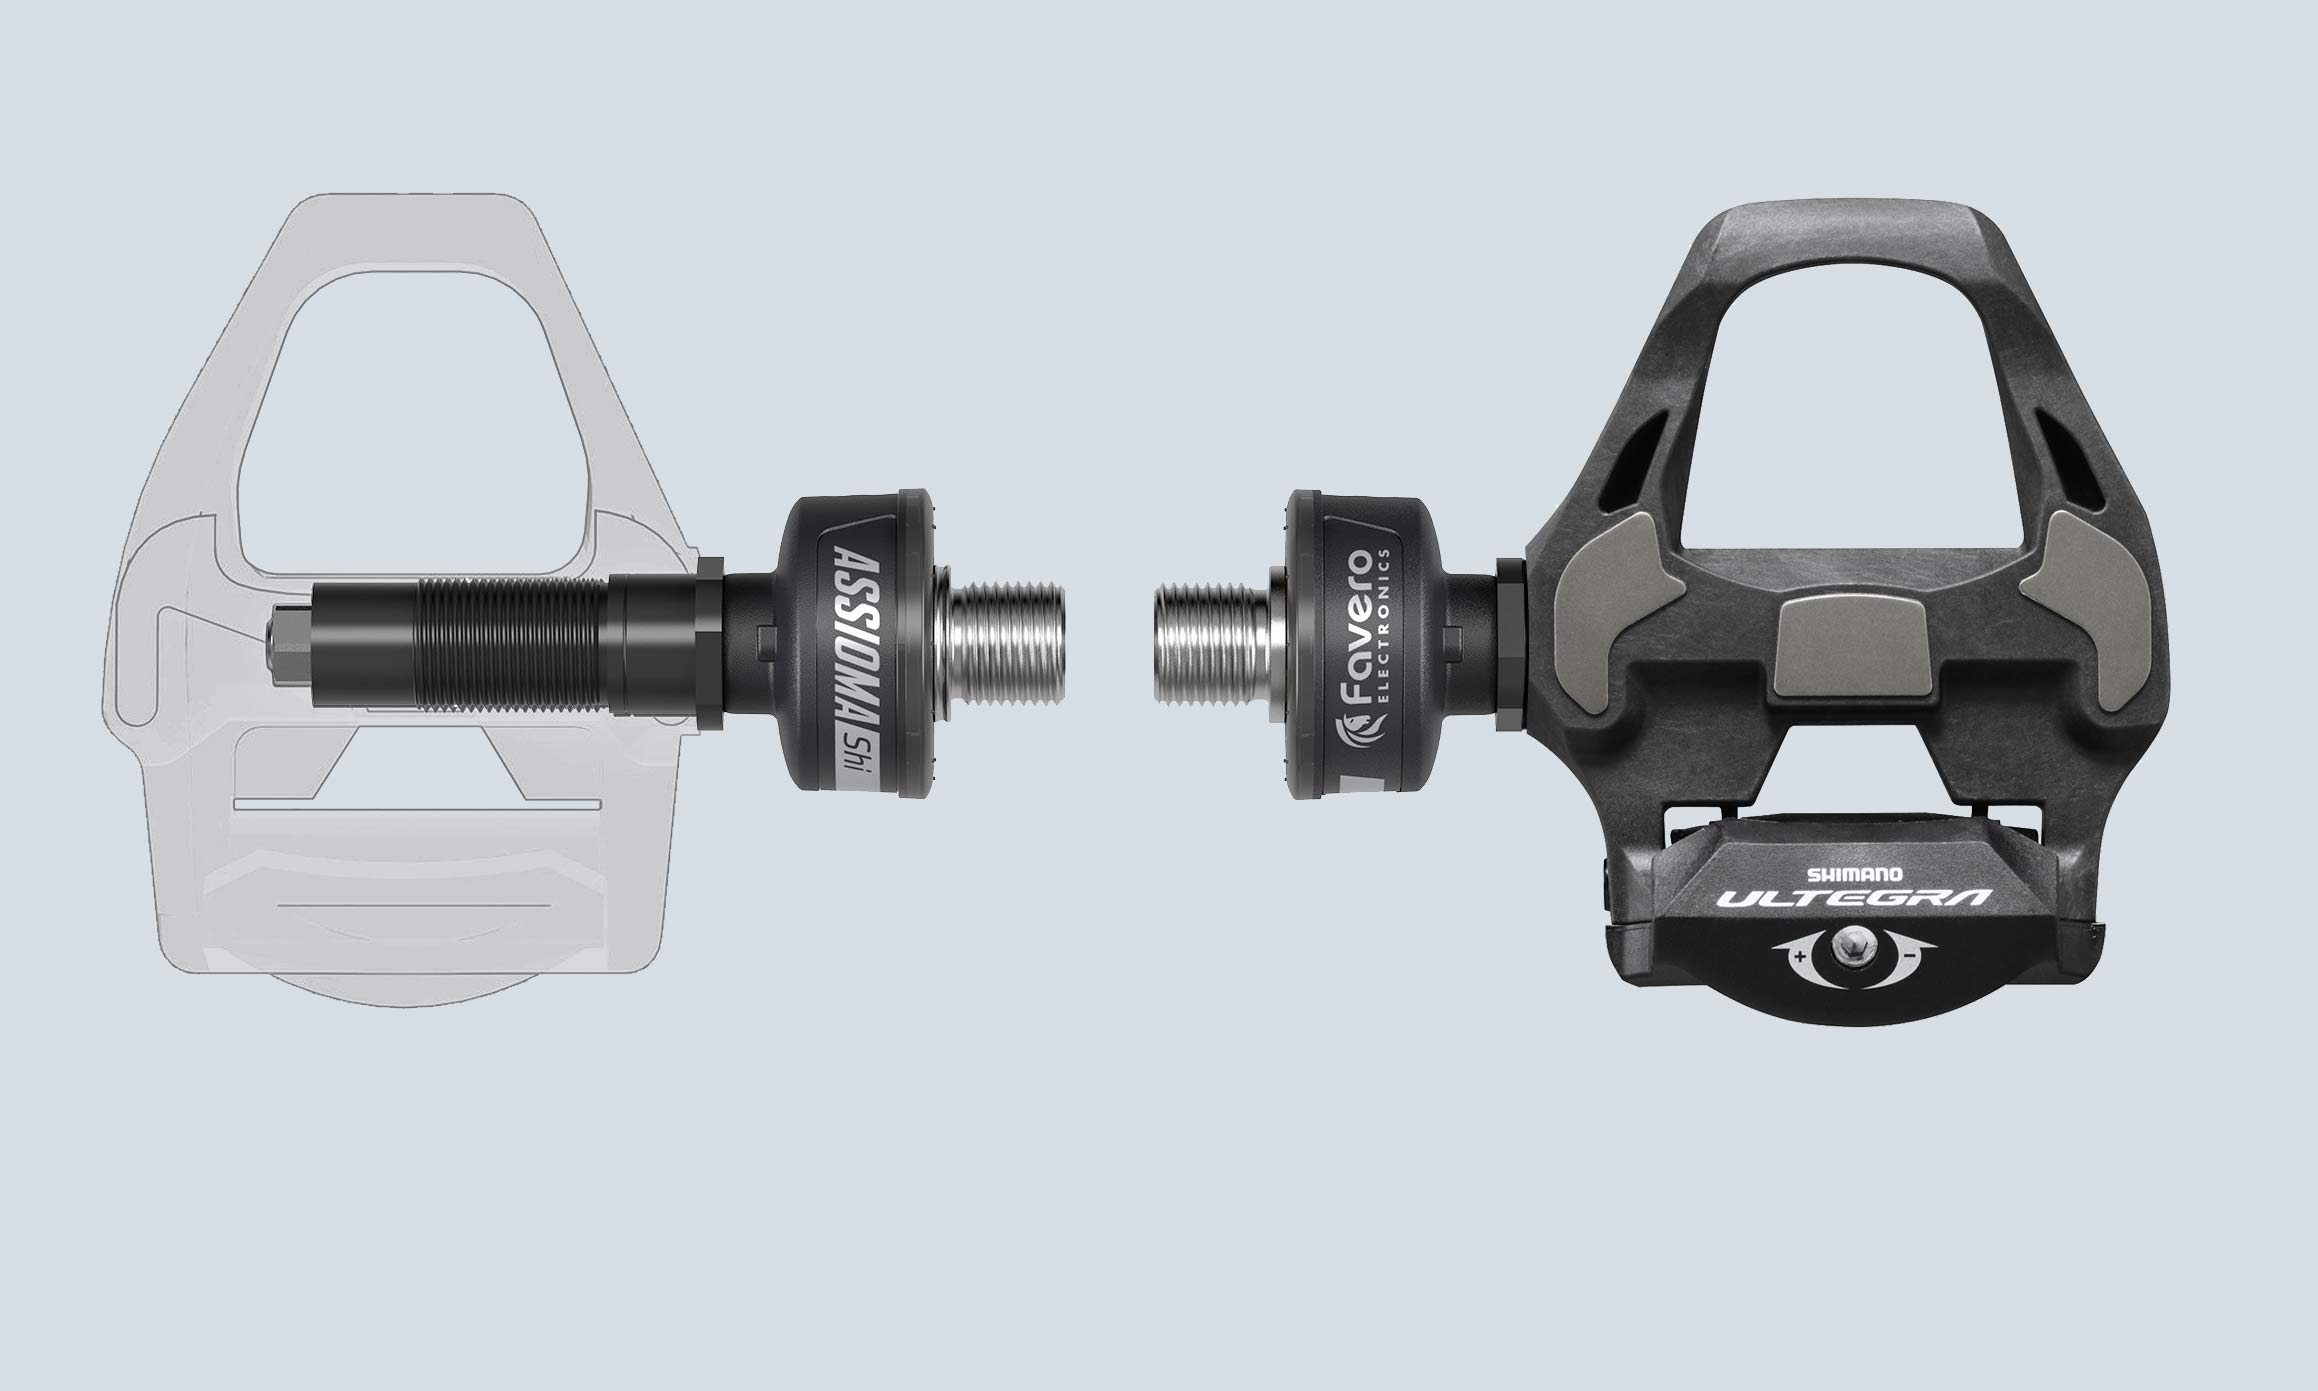 Favero Assioma DUO-Shi Shimano SPD-SL compatible road power meter pedal spindle kit, composite